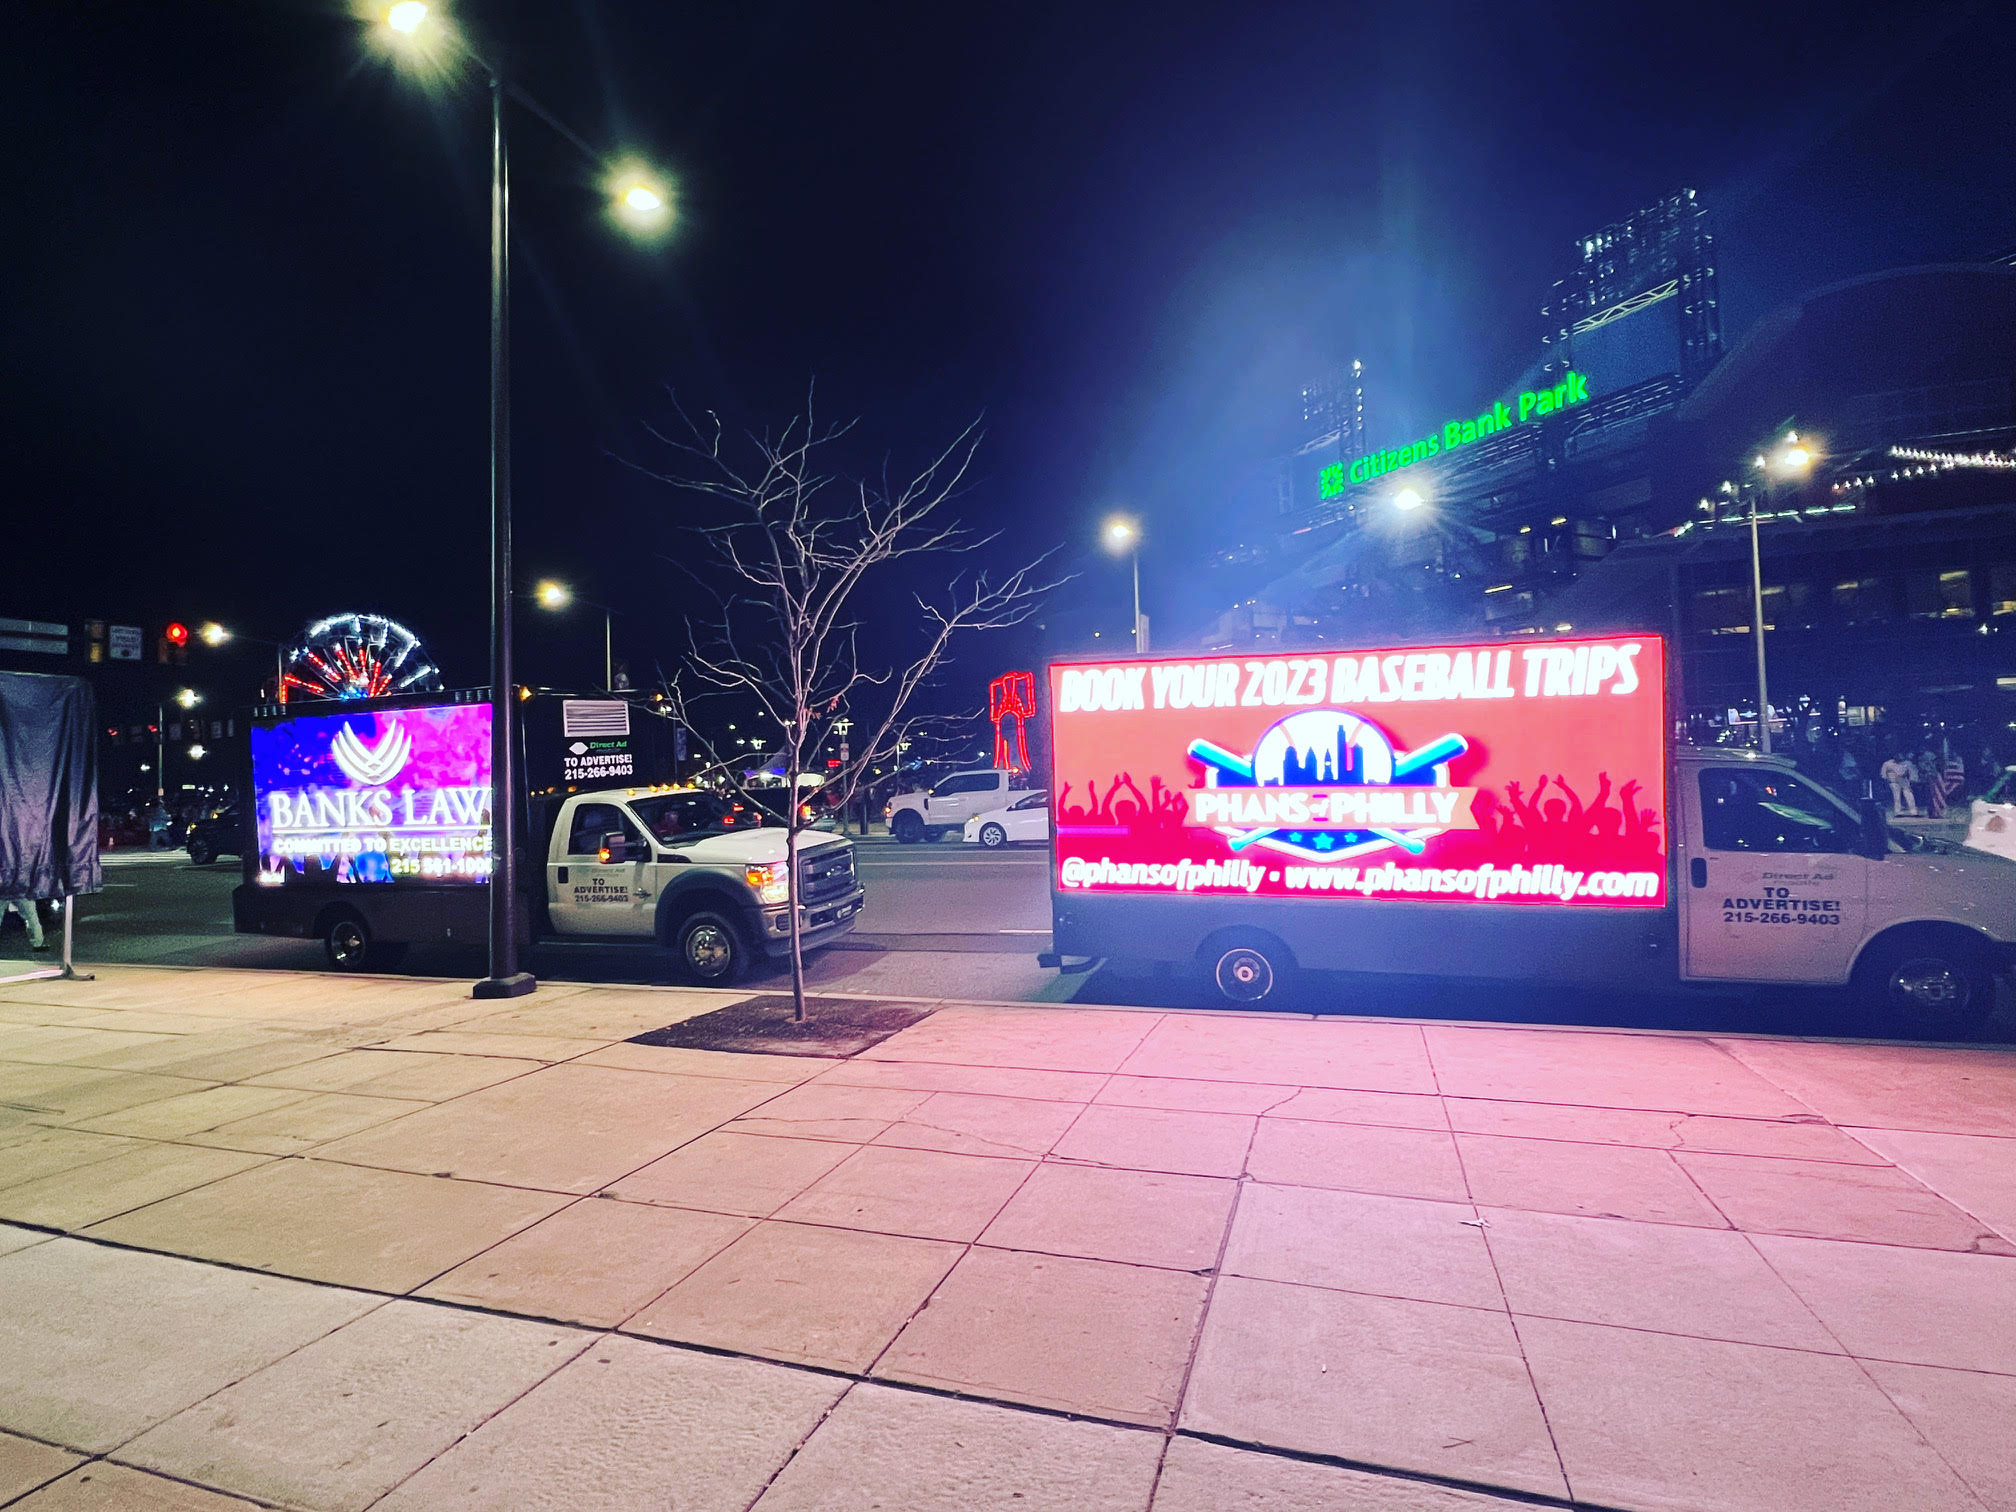 Direct Ad Network LED Billboards Digital TV Networks Direct Ad Network Philly Red October Your company can been seen in high volume places like Citizens Bank Park and other major venues in Philly and Nationwide LED Billboard Trucks have an ROI Philly